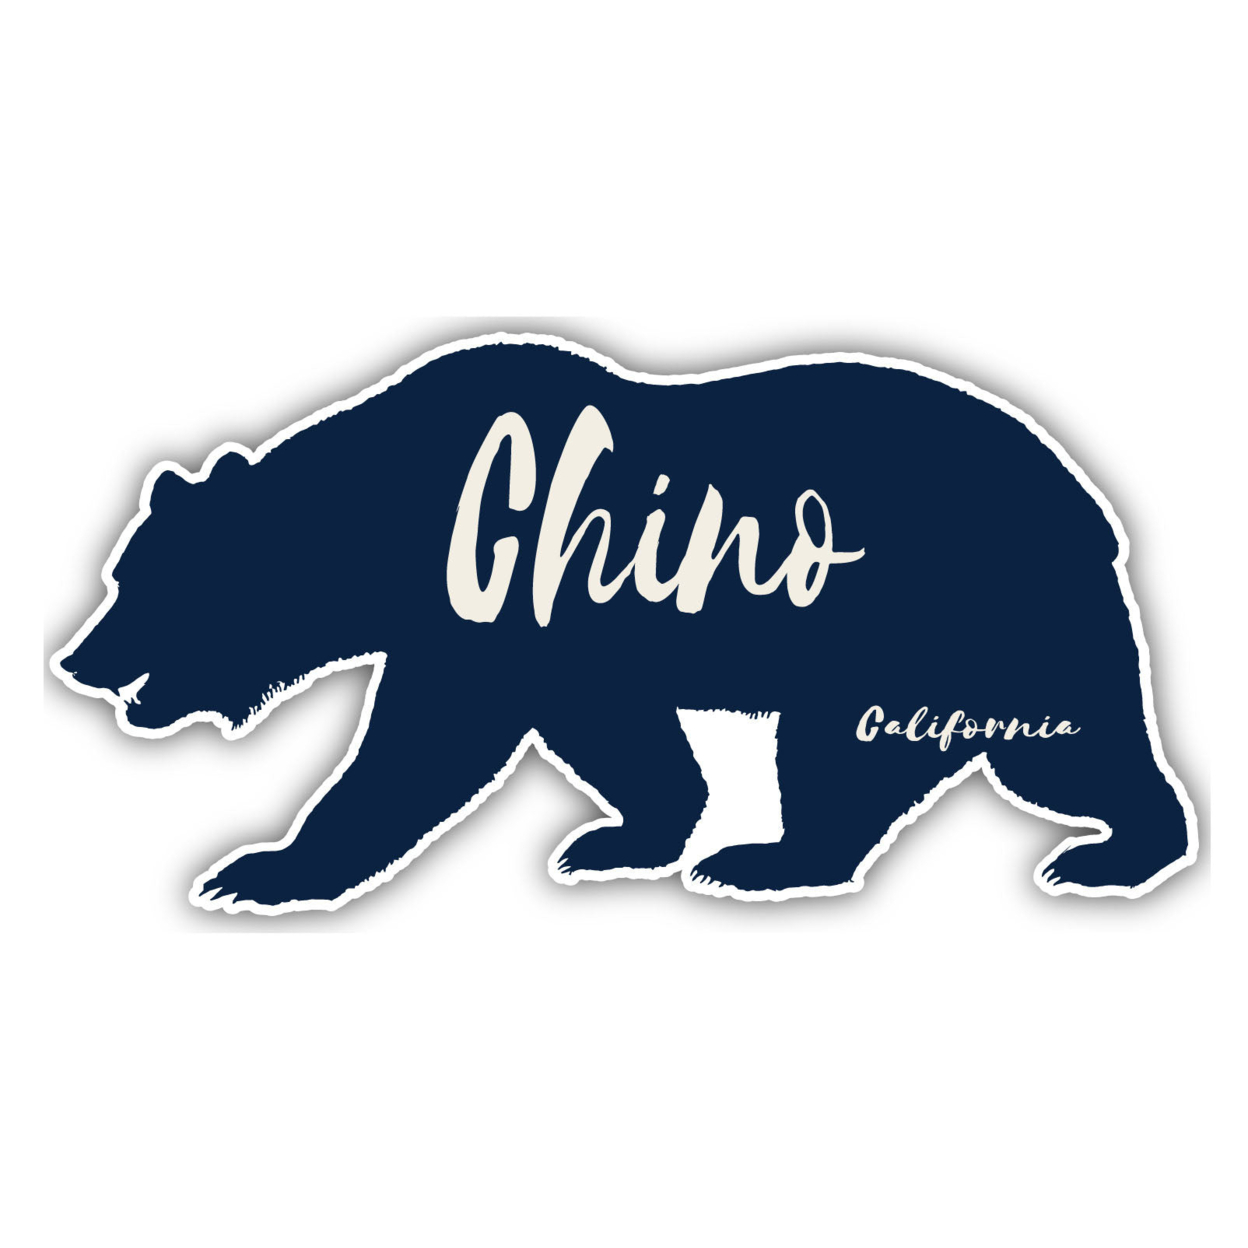 Chino California Souvenir Decorative Stickers (Choose Theme And Size) - 4-Pack, 2-Inch, Bear